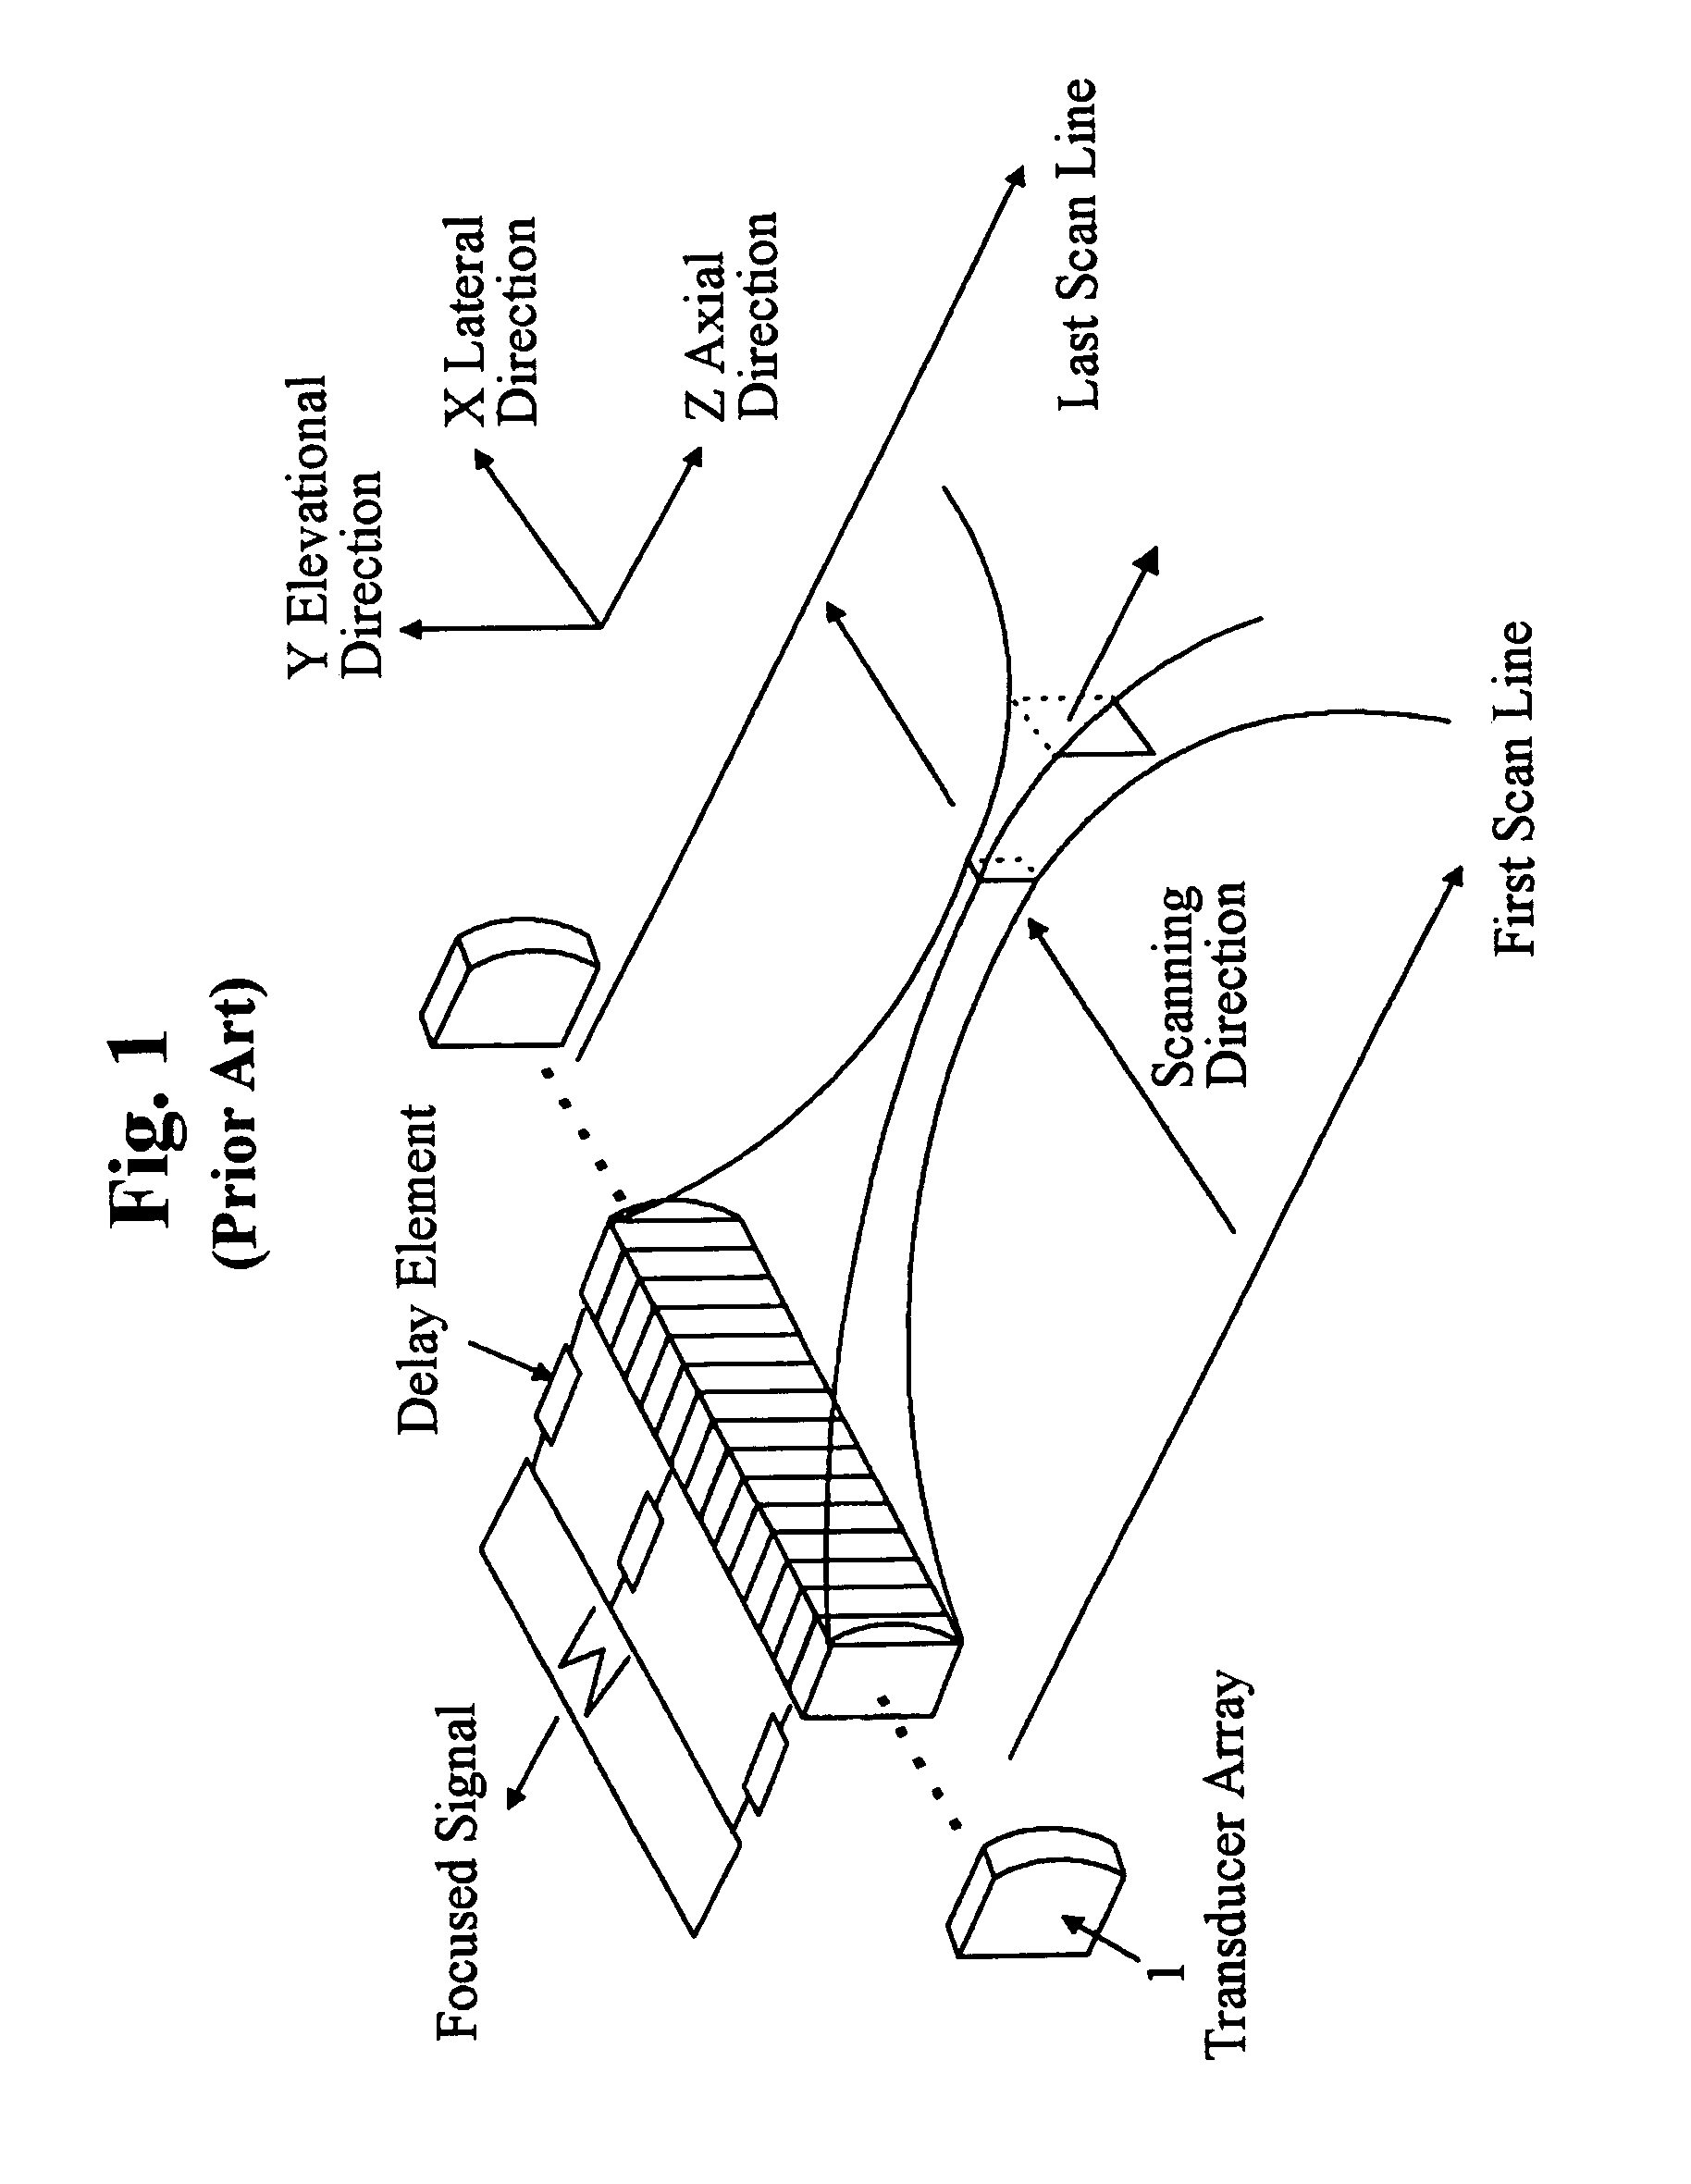 Ultrasound imaging system and method based on simultaneous multiple transmit-focusing using weighted orthogonal chirp signals